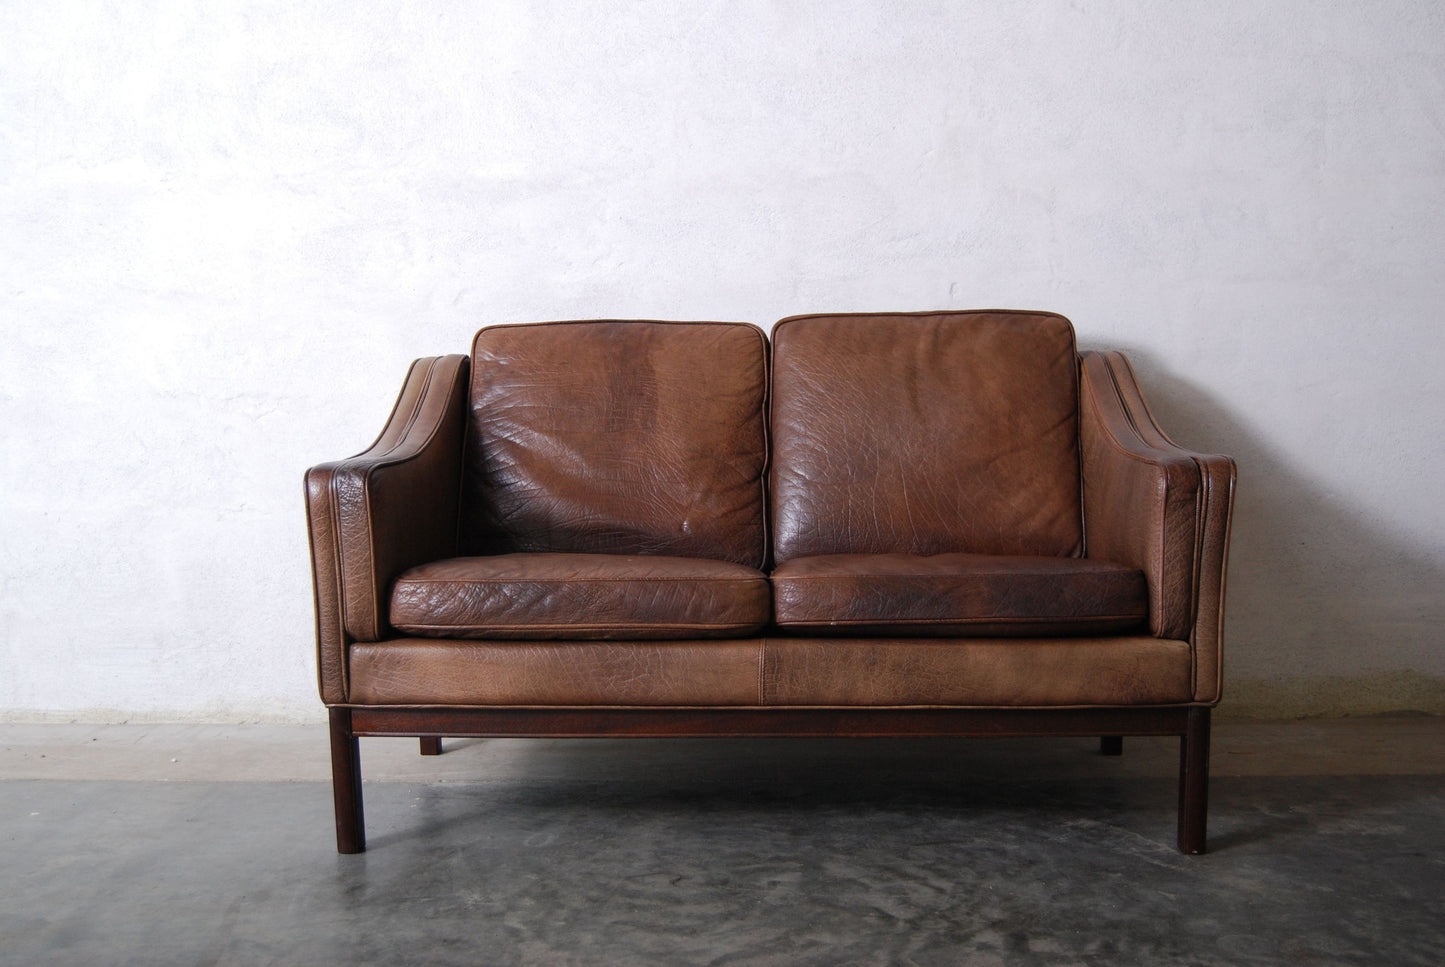 Two seat sofa by Vatne Mbler